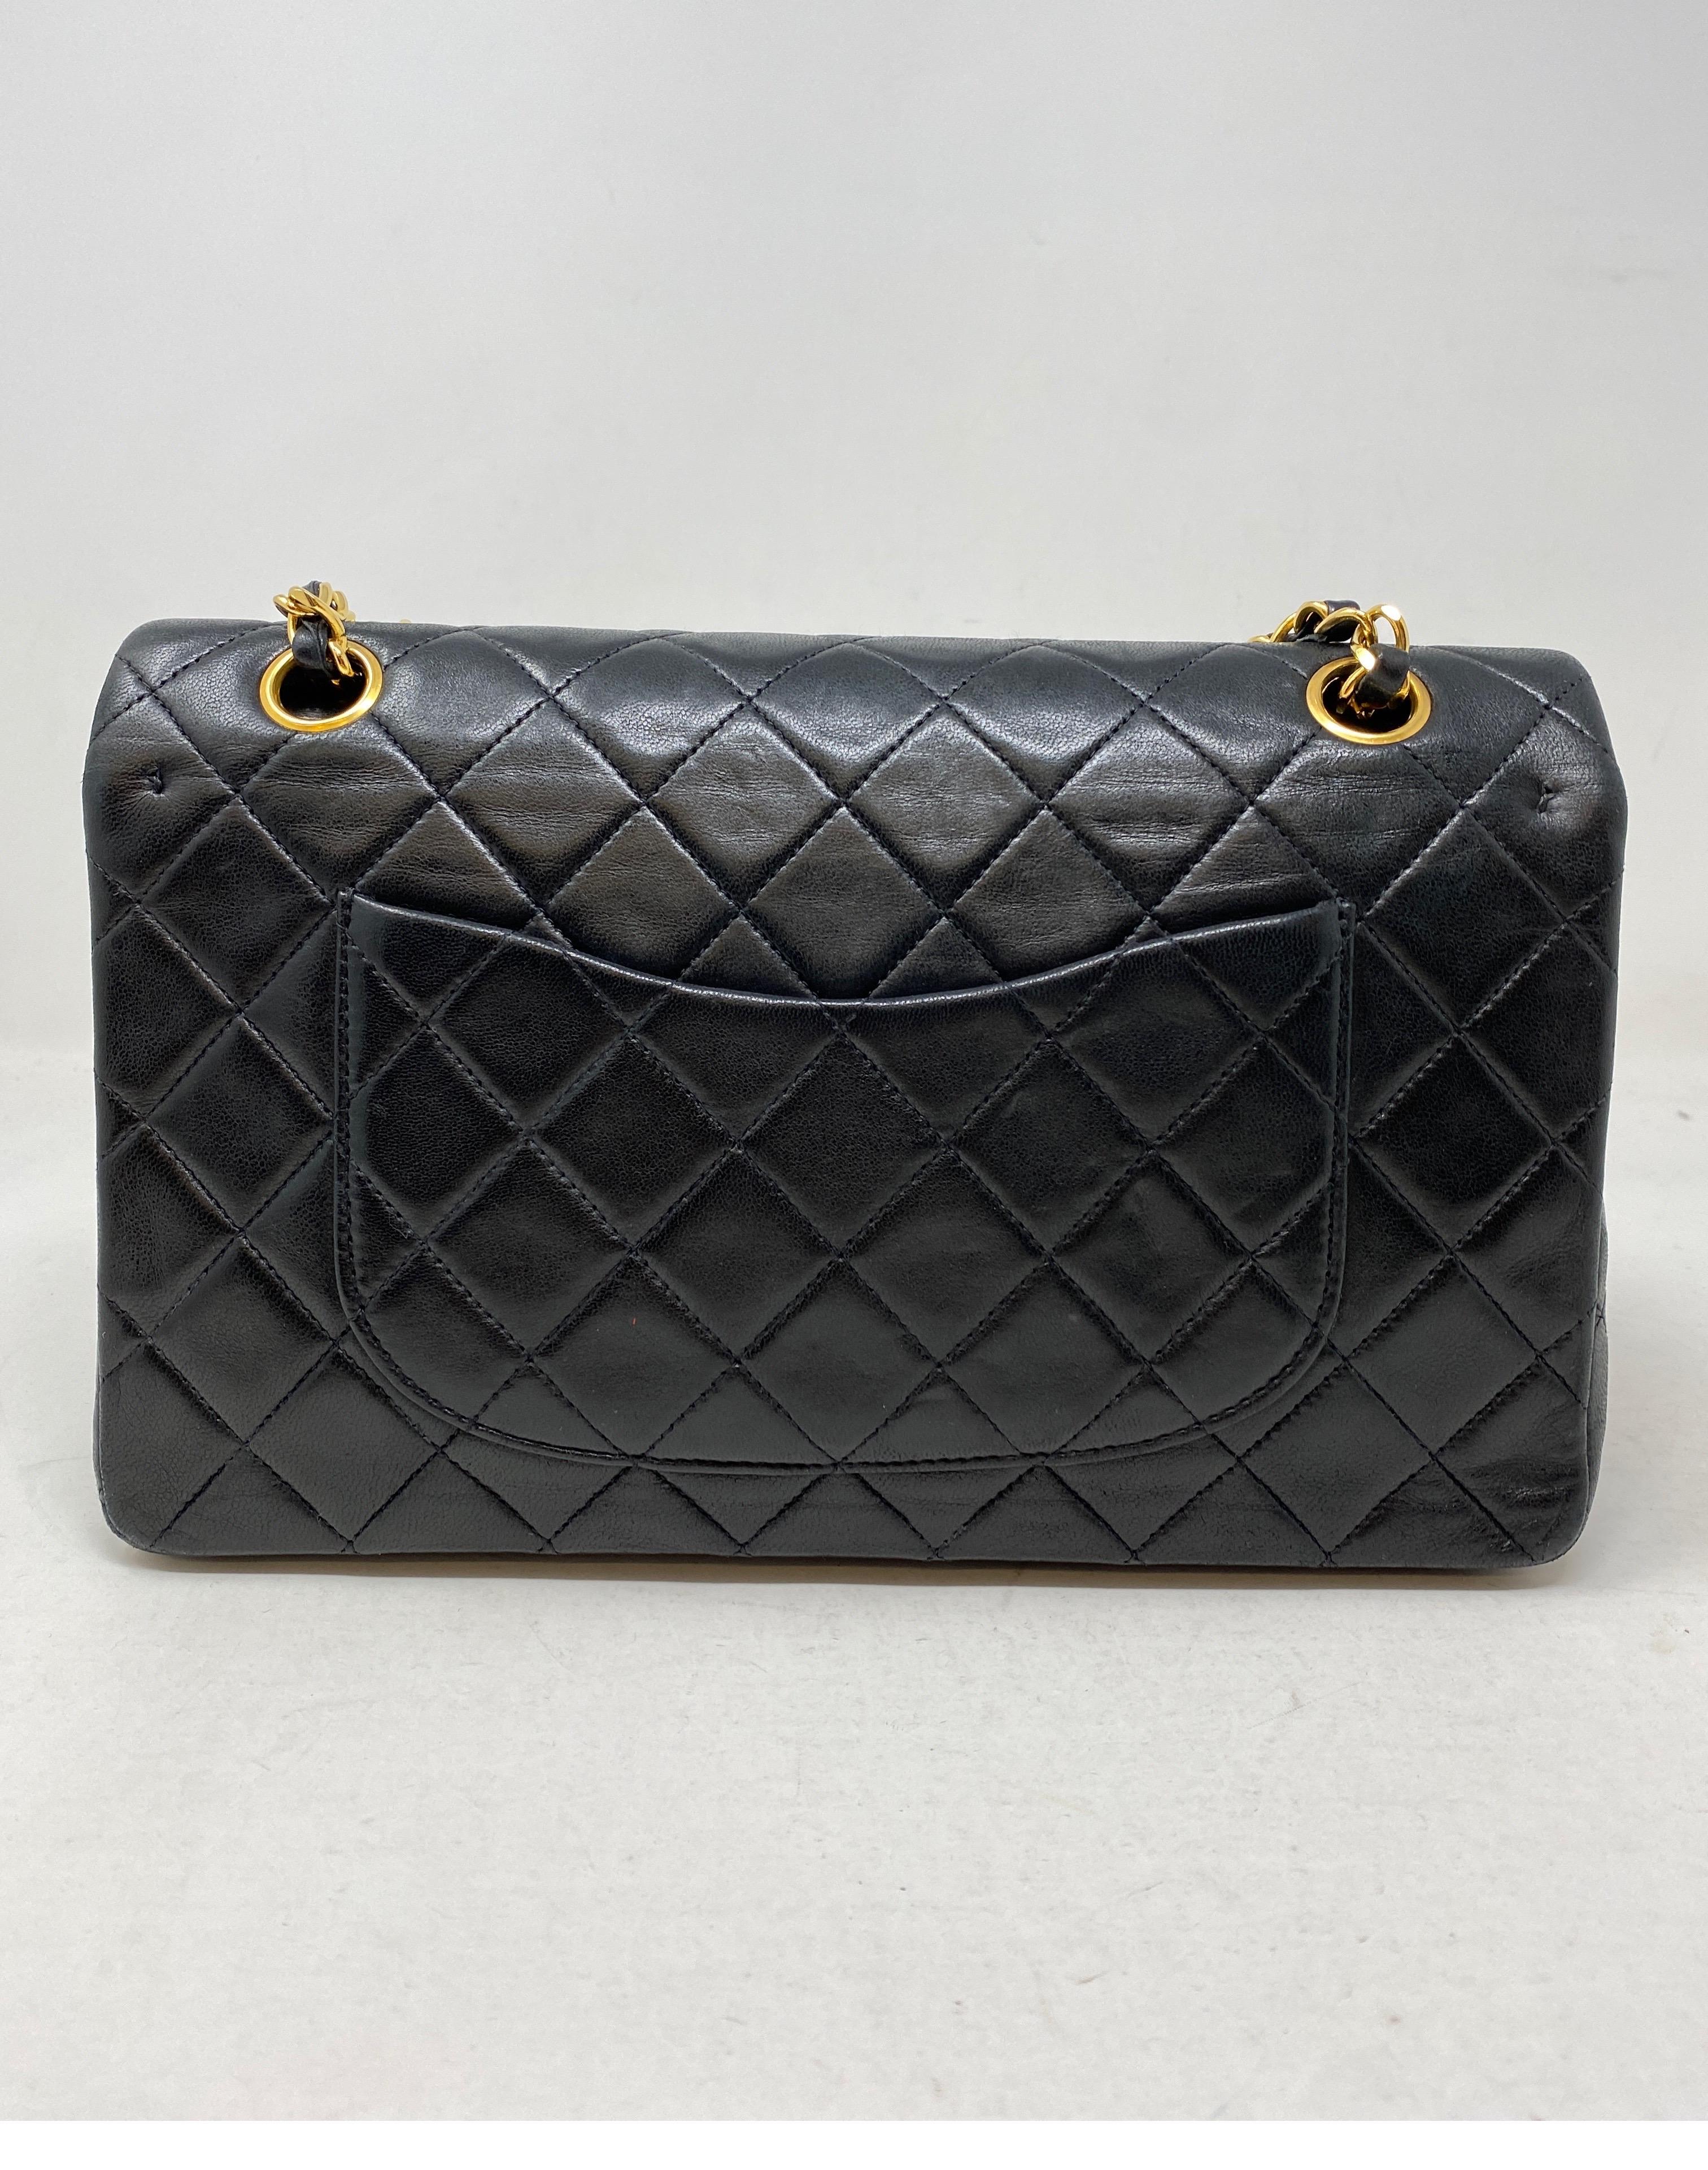 Chanel Black Vintage Double Classic Bag. Medium size. Lambskin leather. 24 kt gold plated vintage chain and CC closure. The most classsic Chanel bag. Burgundy leather interior. Guaranteed authentic. 